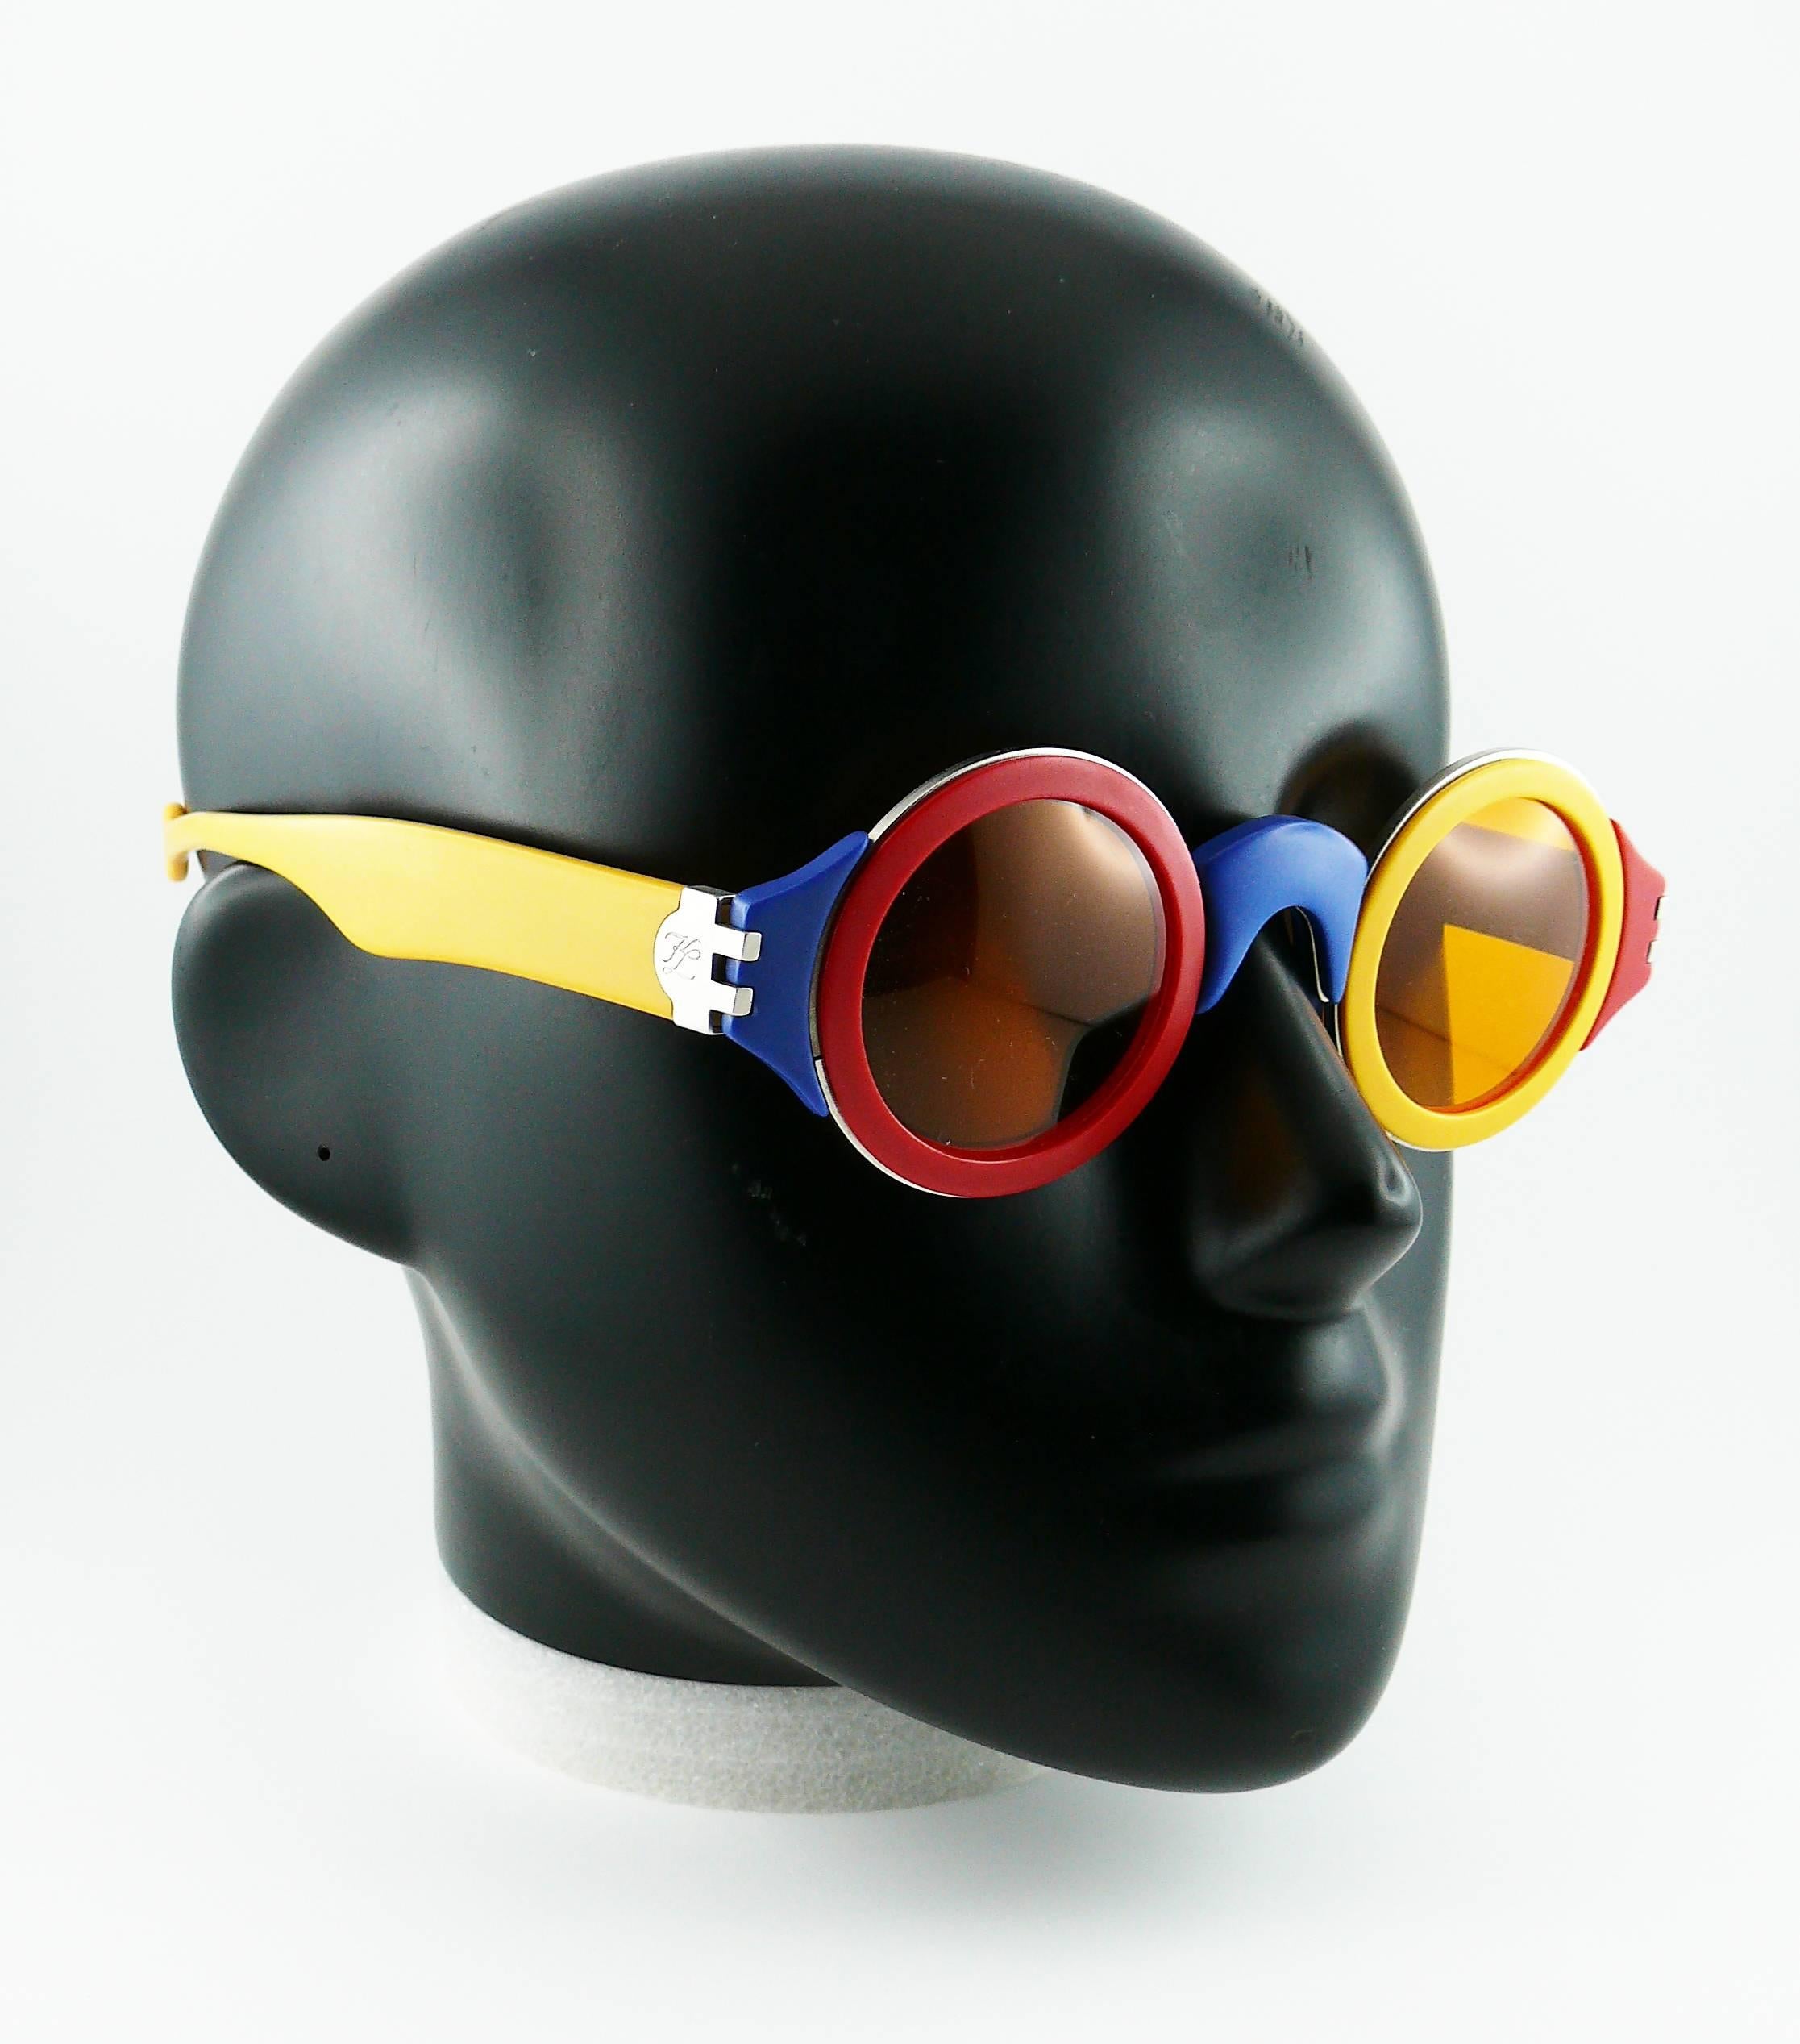 KARL LAGERFELD vintage rare stunning colorful sunglasses.

Limited edition. Numbered Nr. 1318.

Orange lenses.

Signed KARL LAGERFELD on the inside temple.
Model 3604.
Embossed KL.

CONDITION REPORT
- Frames
Minor/Moderate scratches throughout. 
-